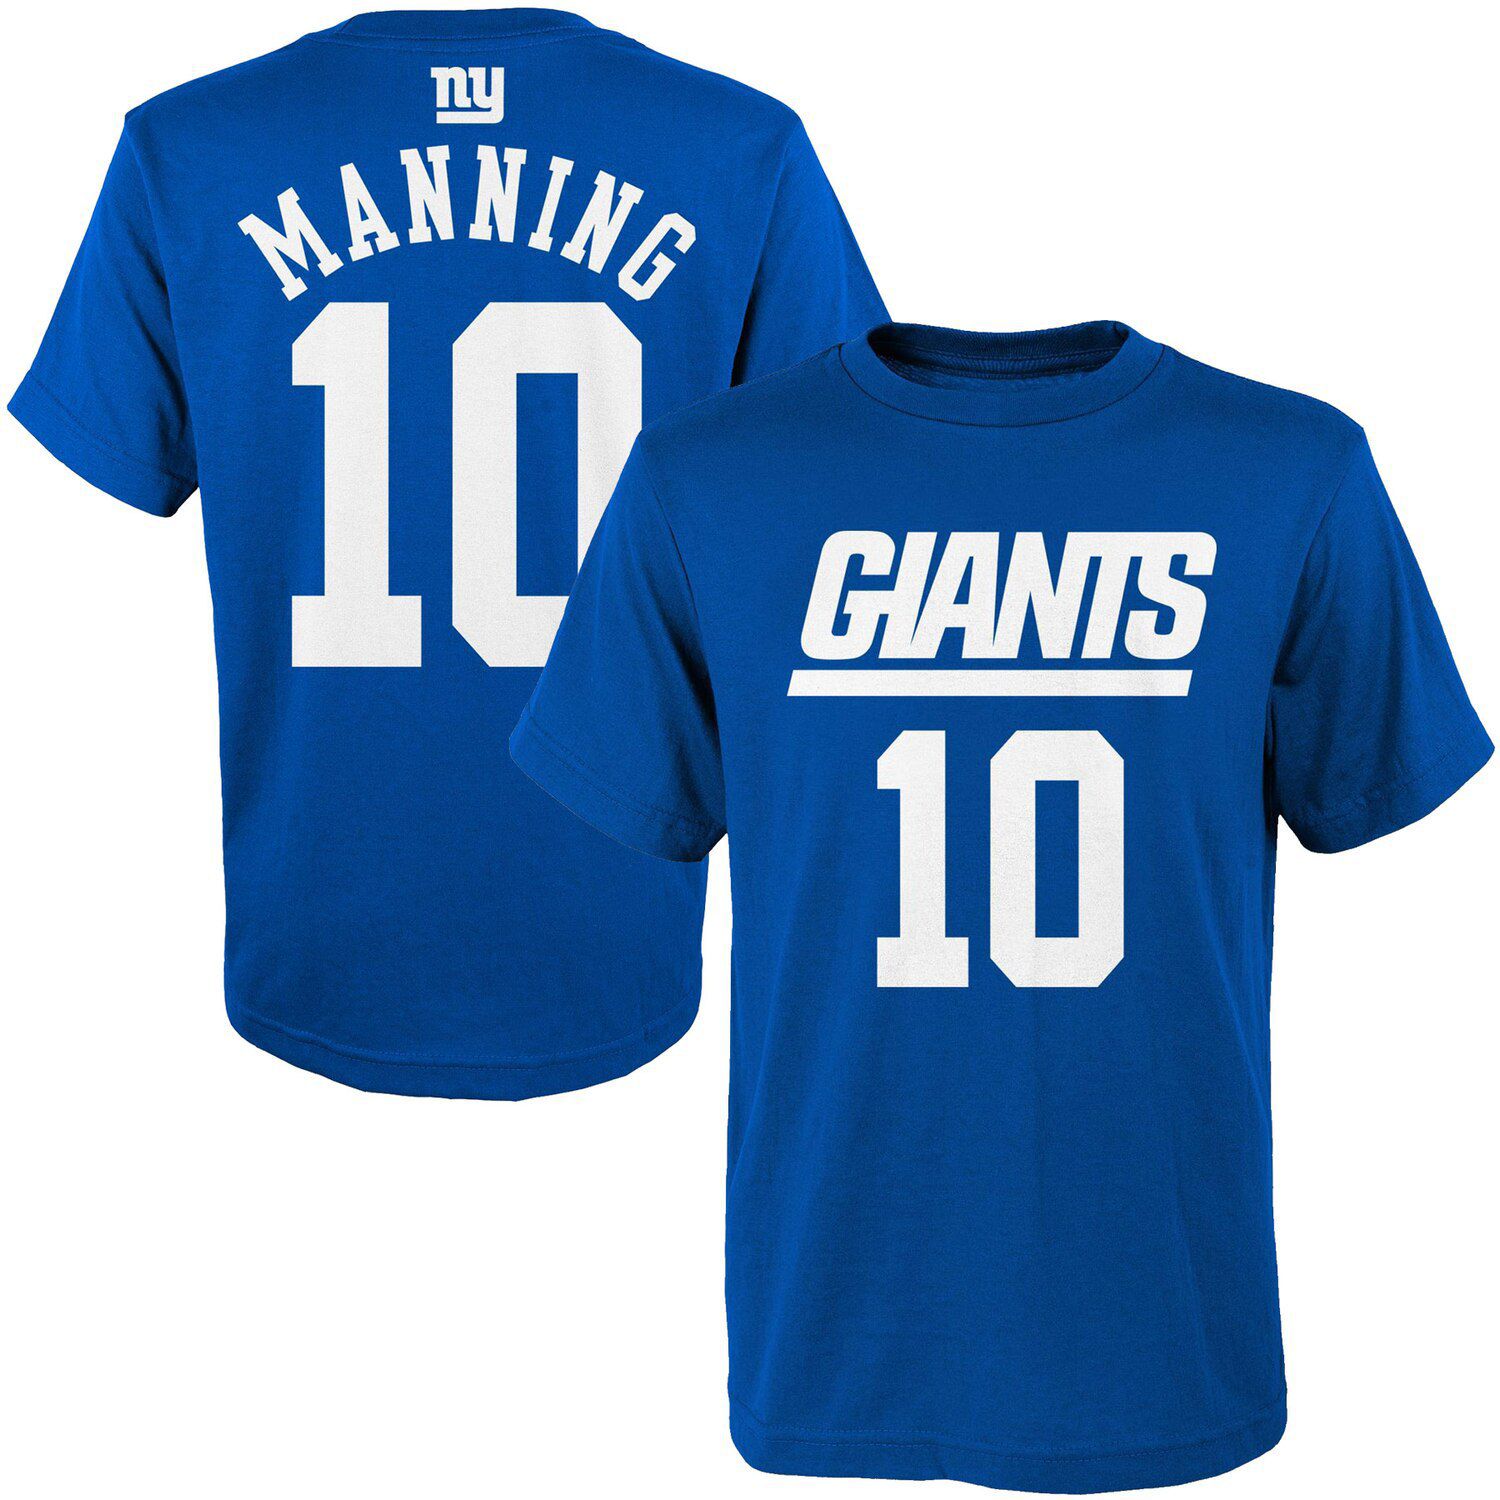 eli manning youth jersey blue